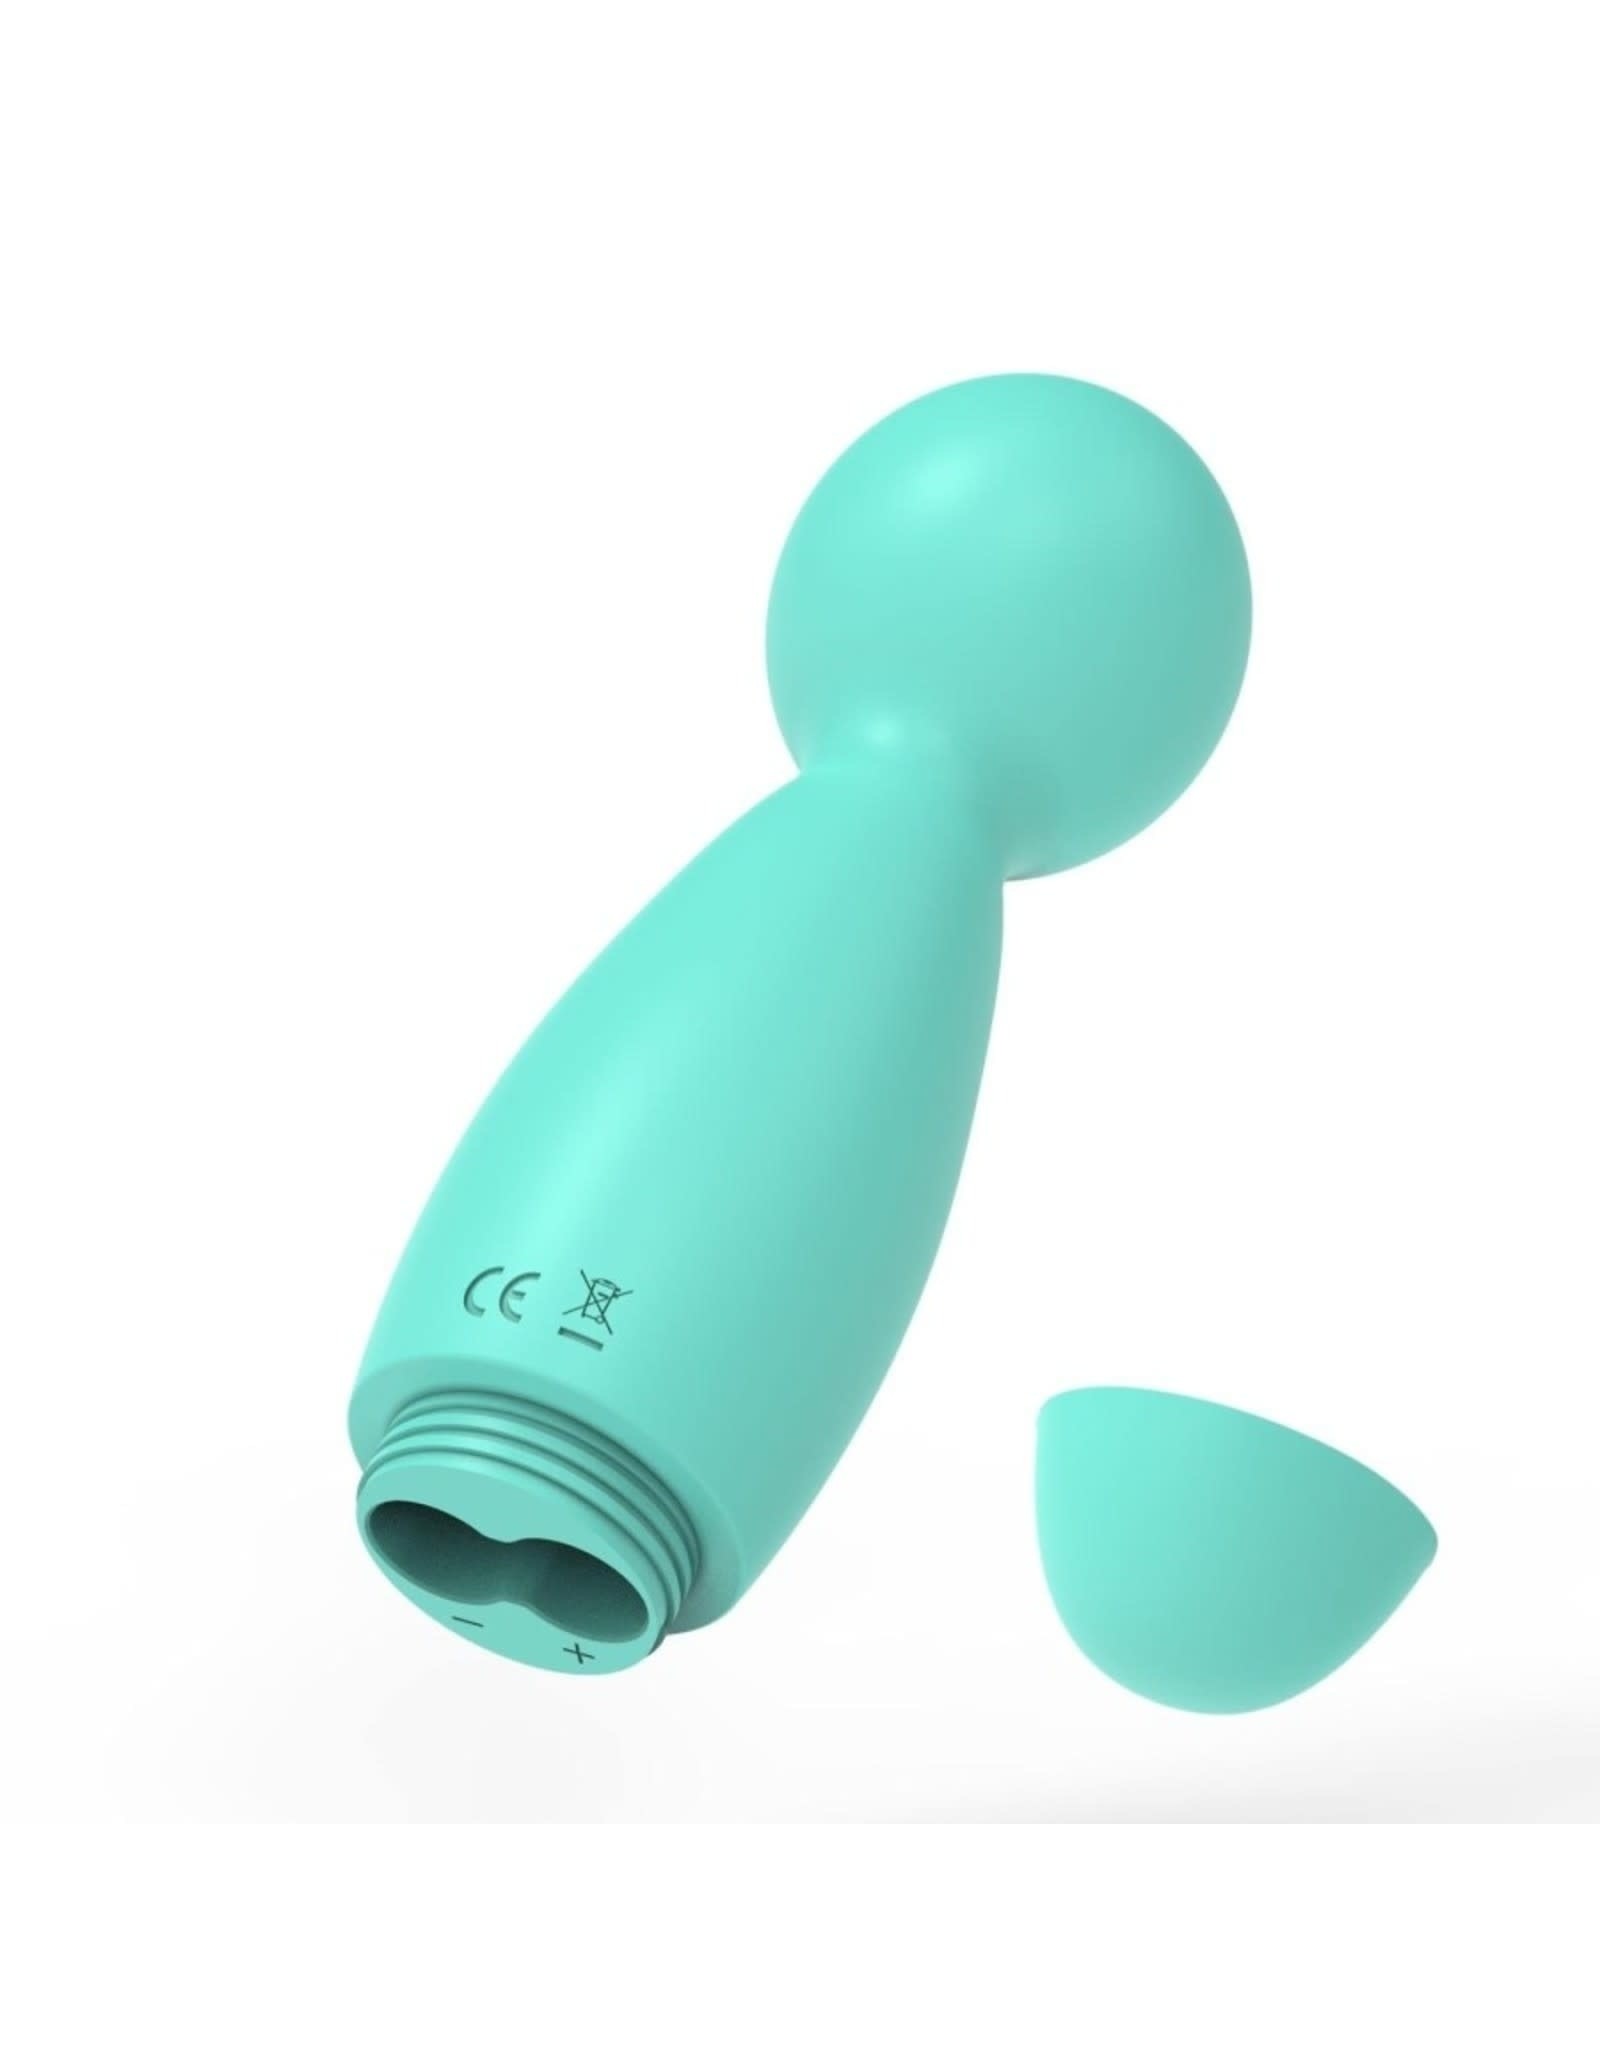 TRACY'S DOG TRACY'S DOG - MINI WAND MASSAGER TEAL TRAVELLER